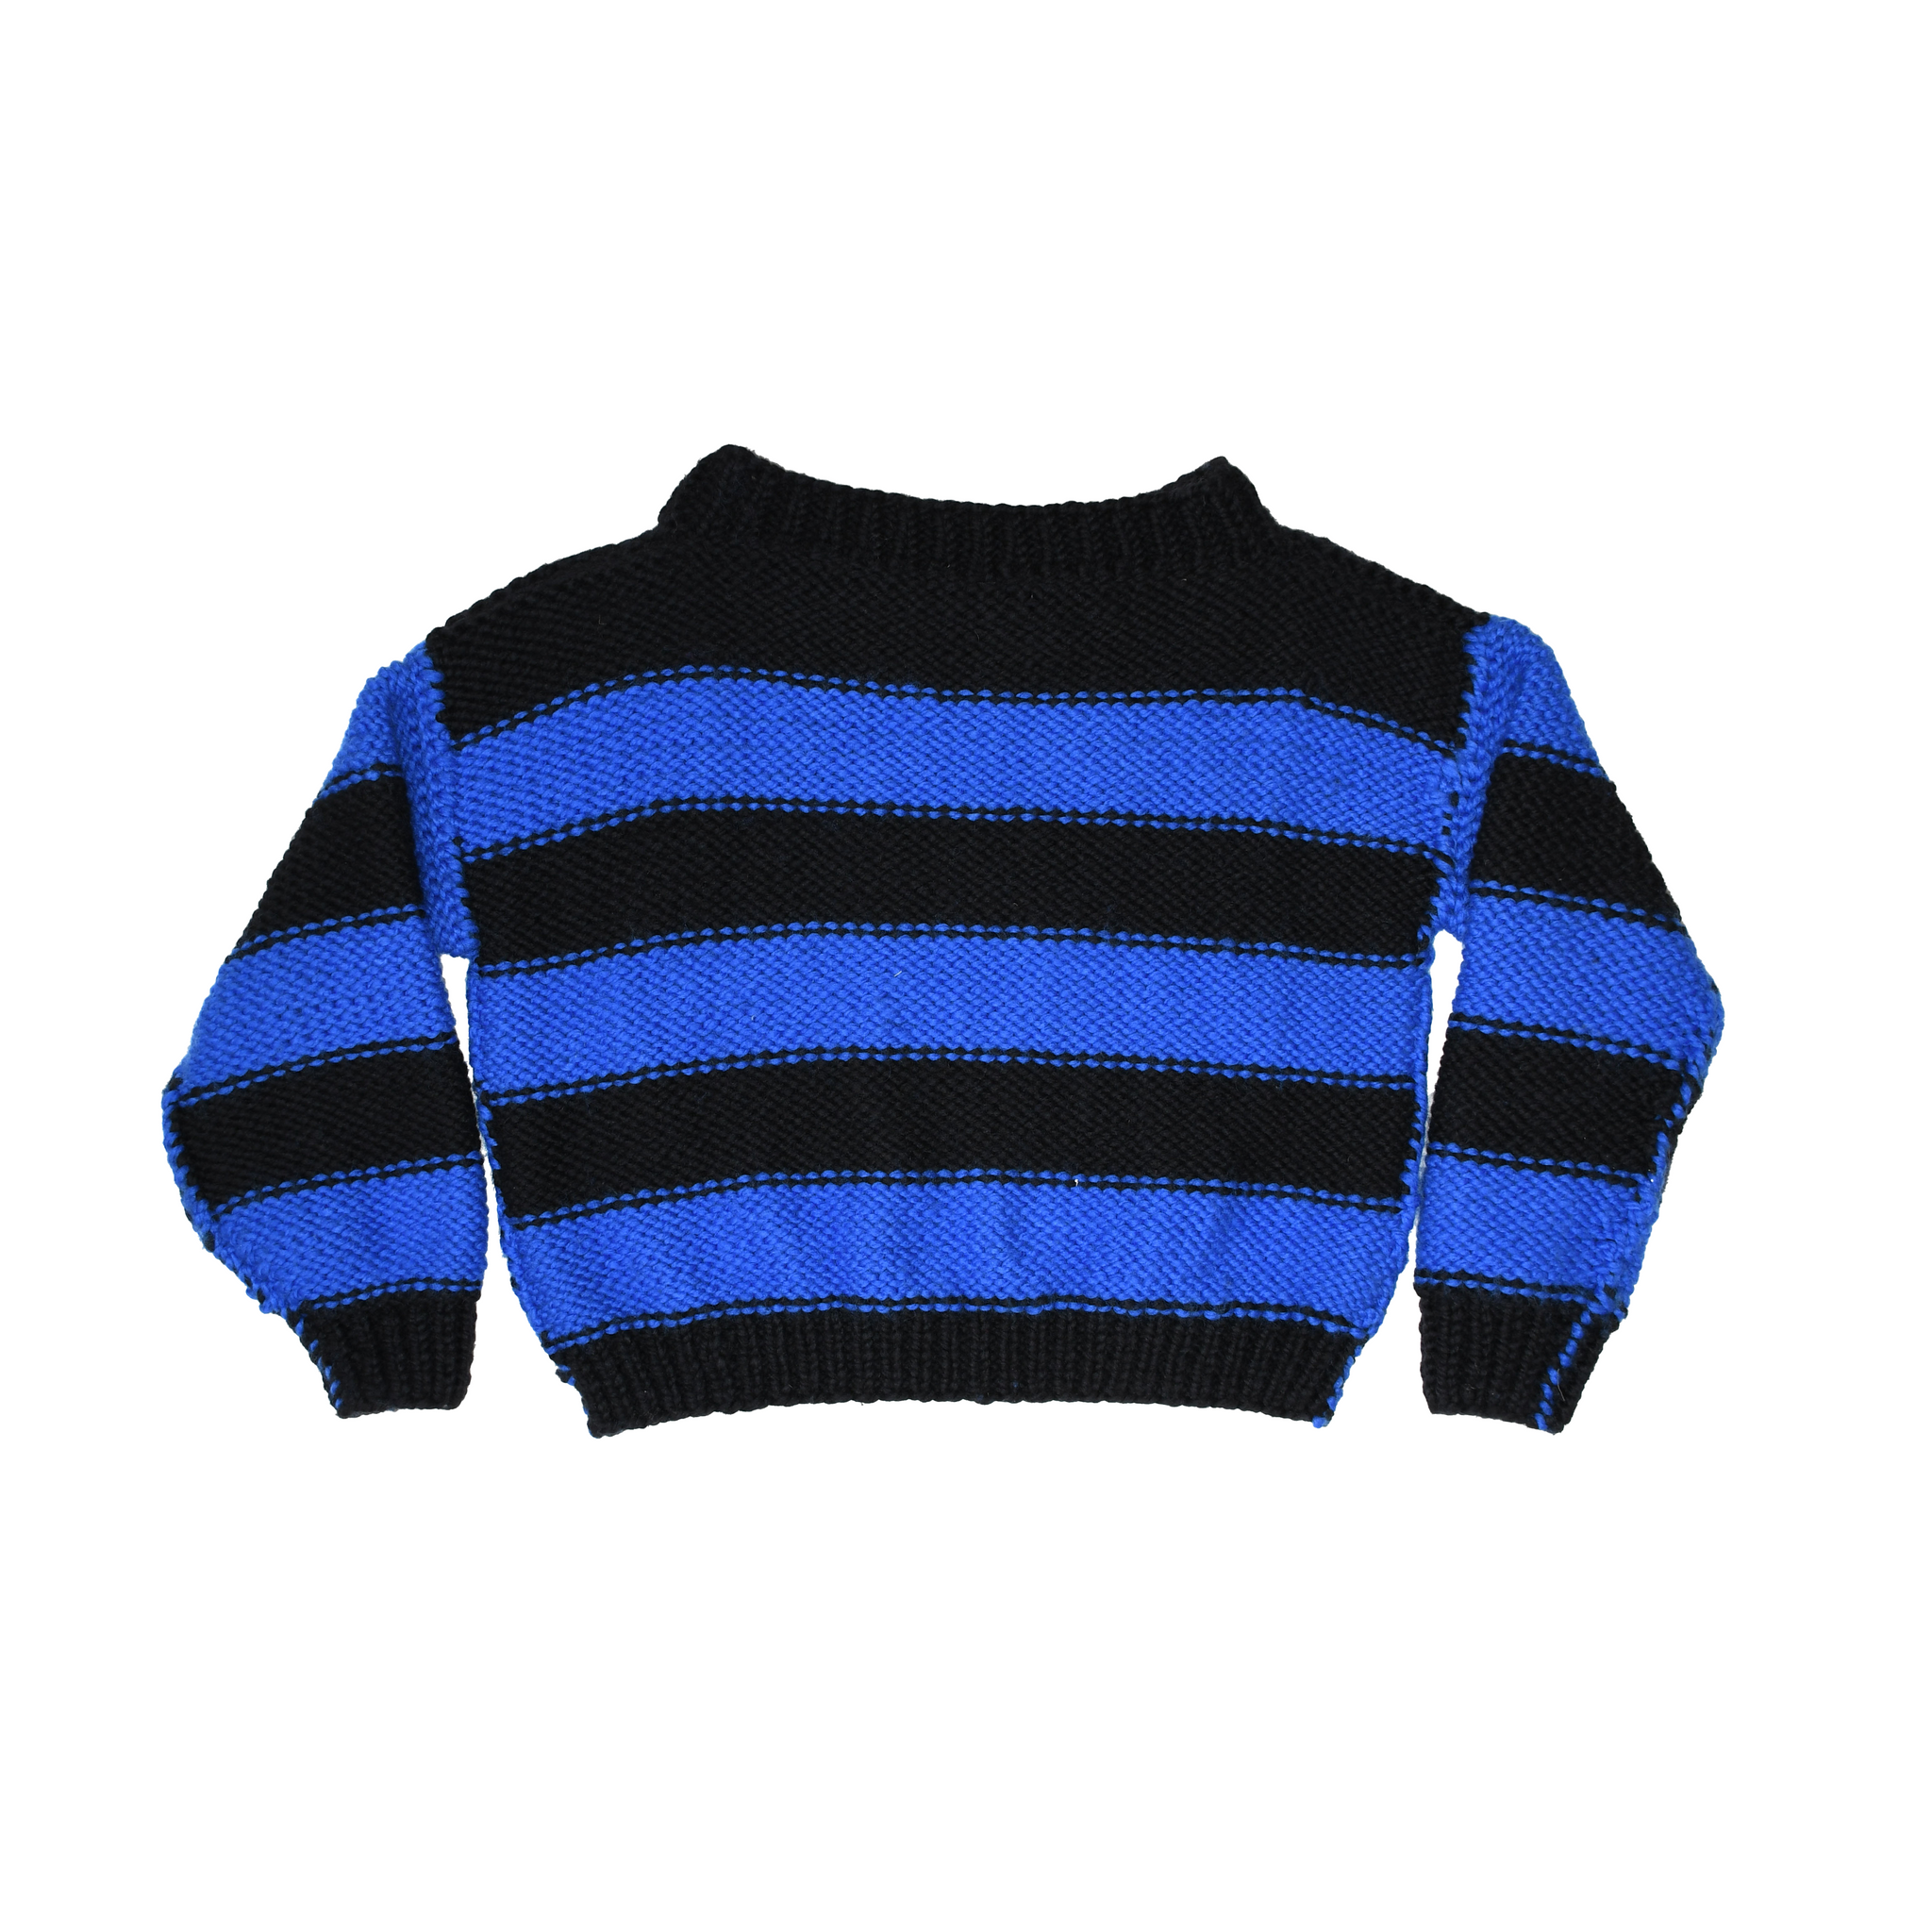 Frisson Knits - Deconstructed Black & Blue Sweater